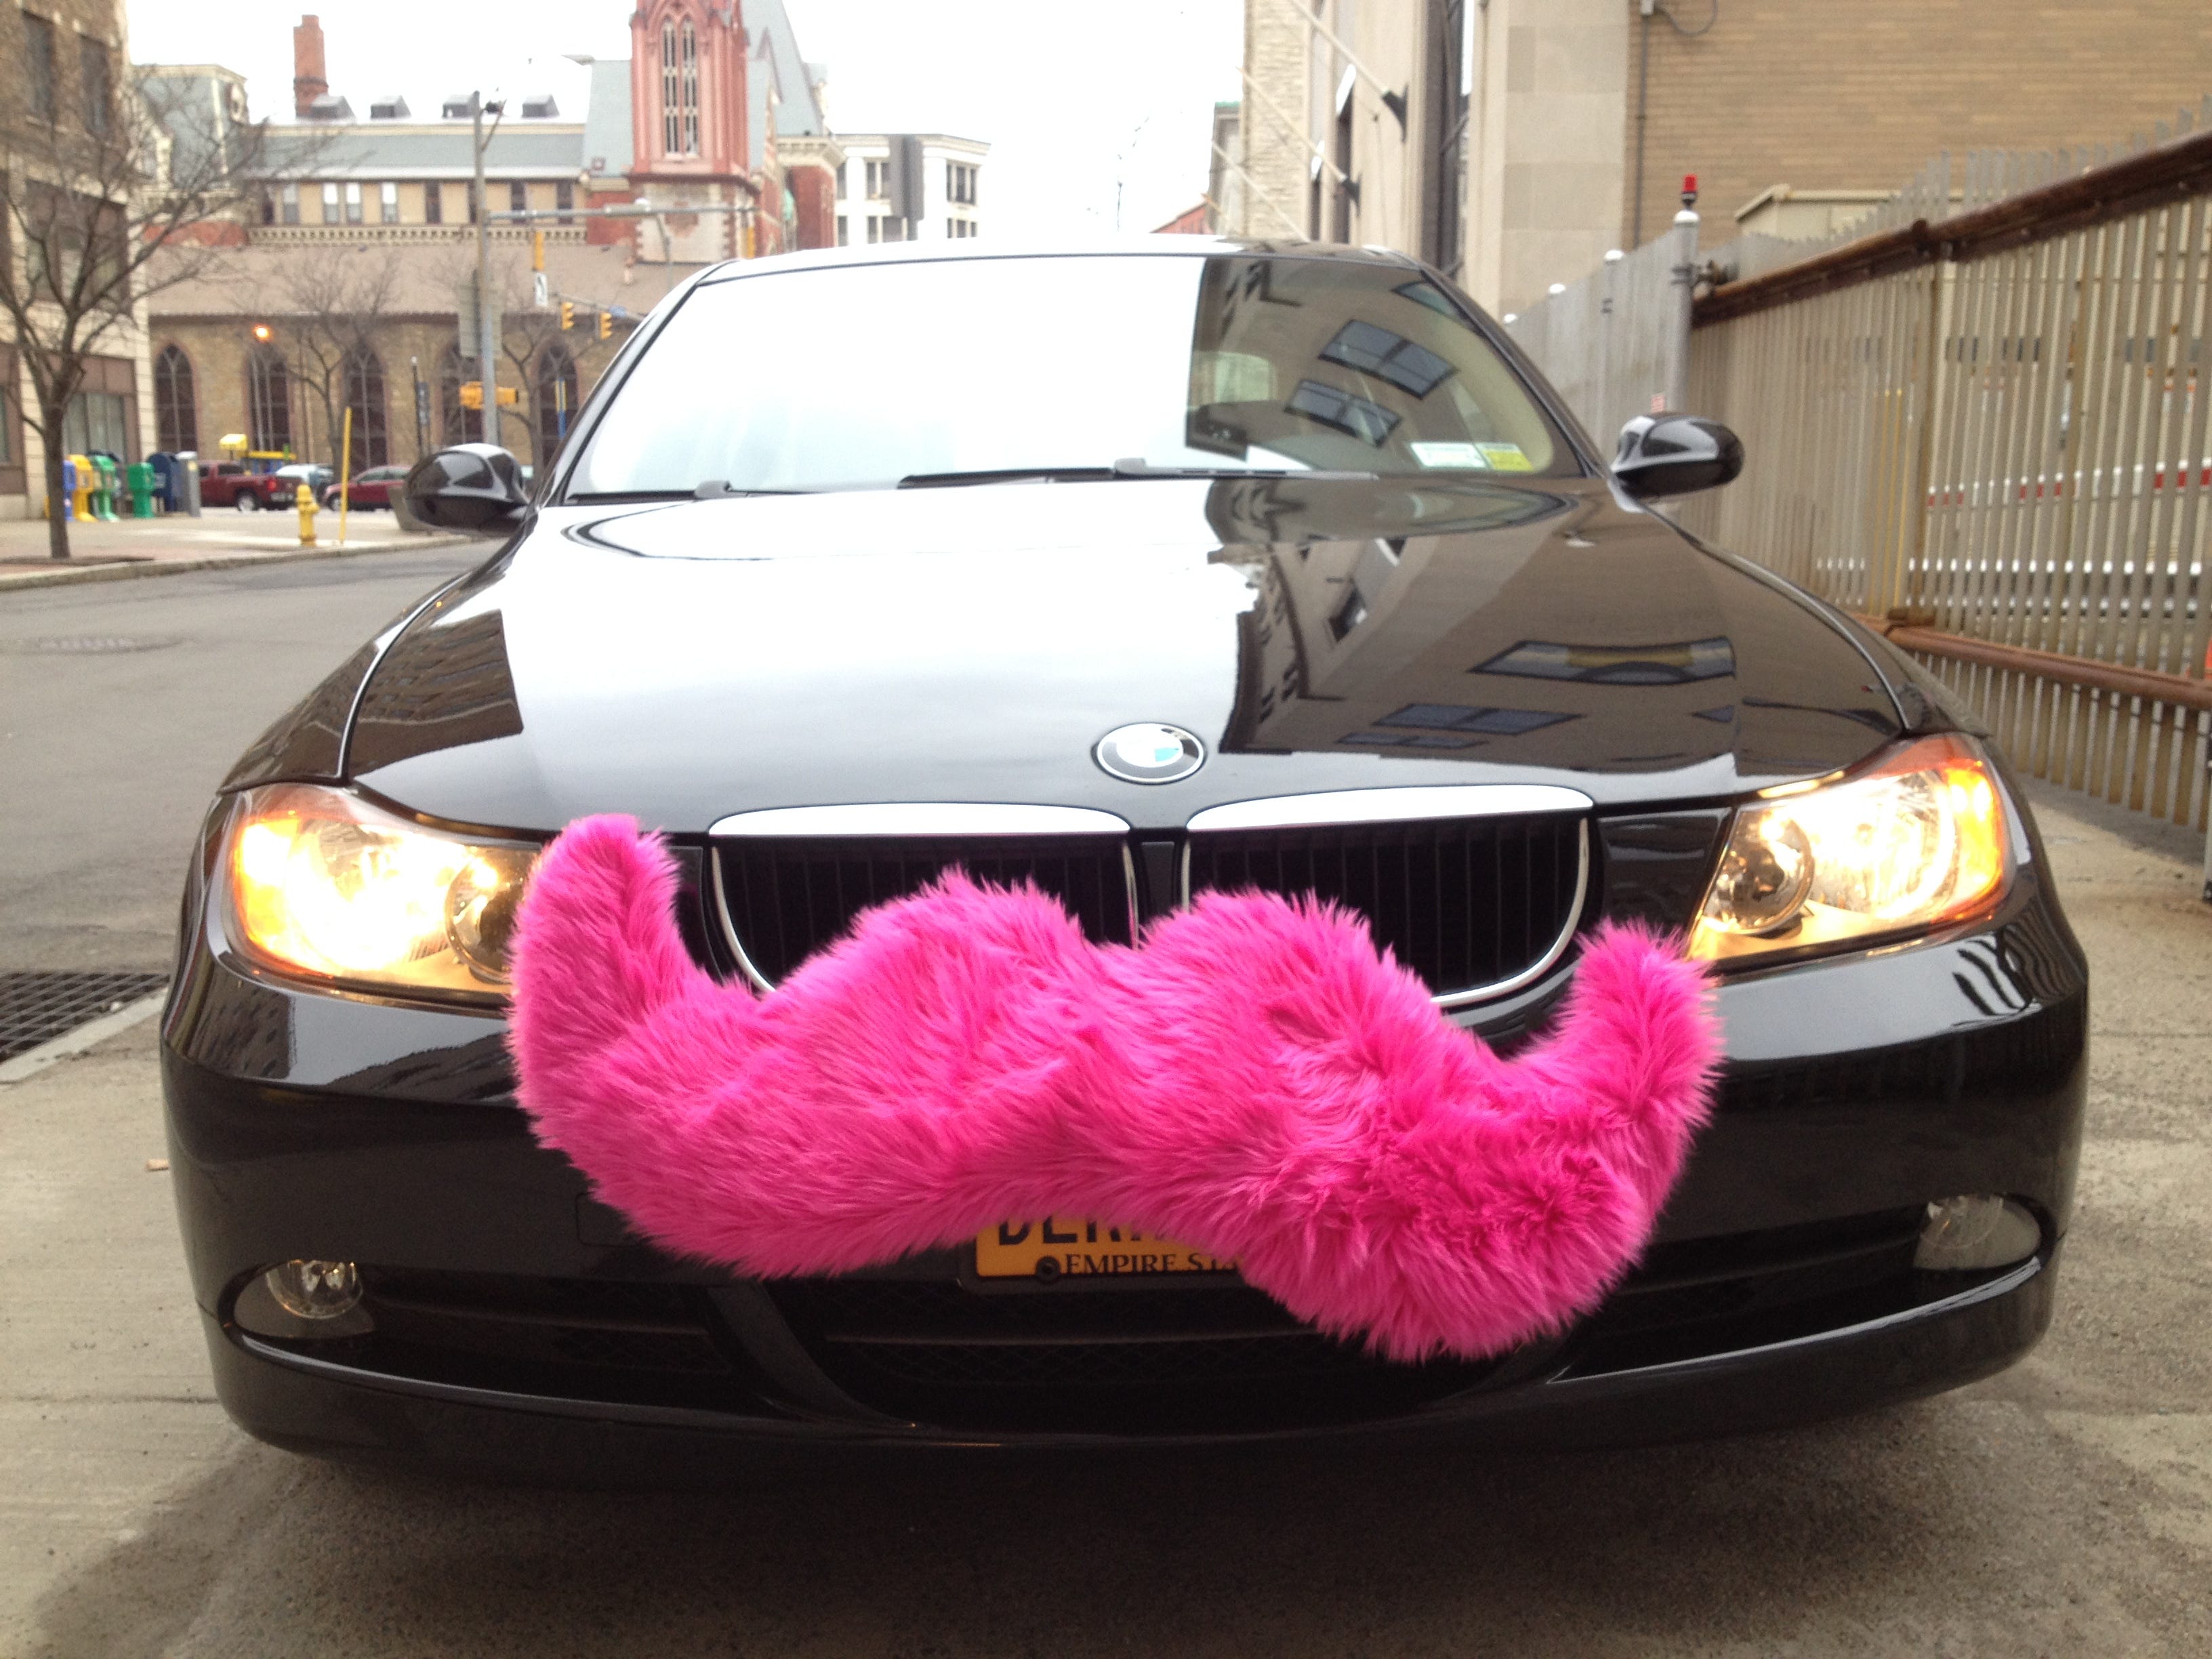 Lyft to launch ride-hailing services at Rochester airport on June 29